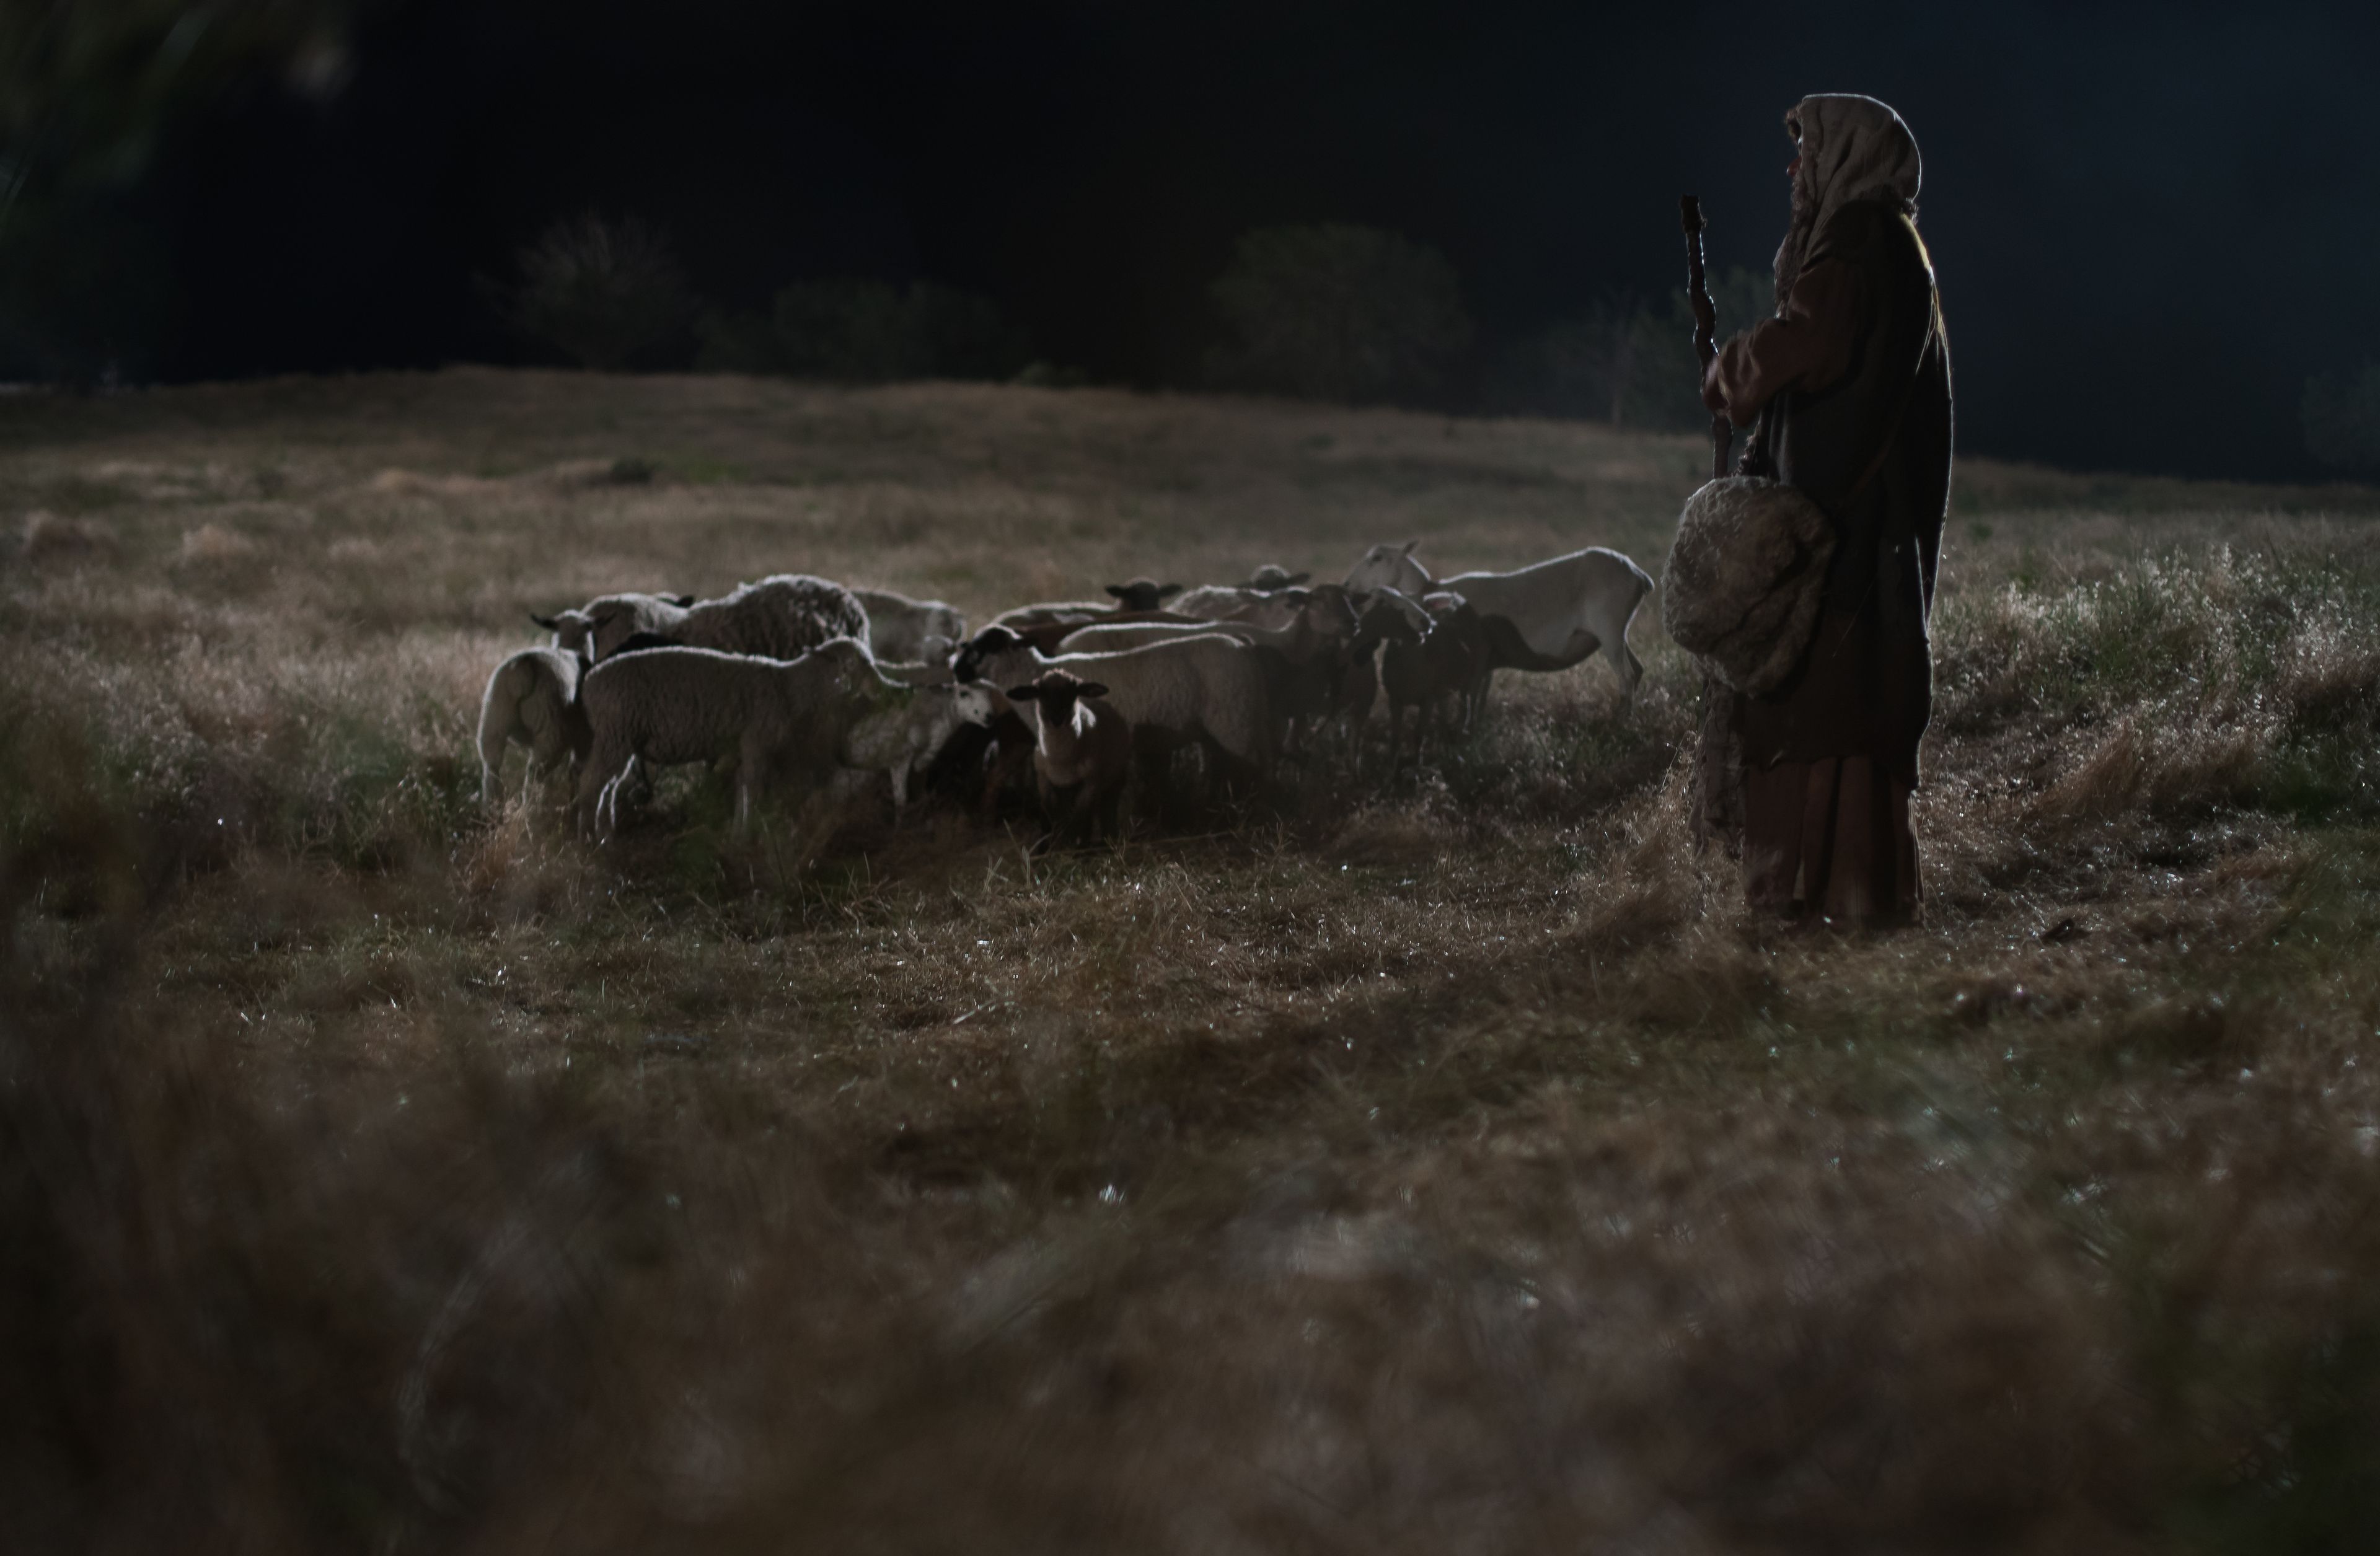 A shepherd stands alone in a field at night with his sheep.